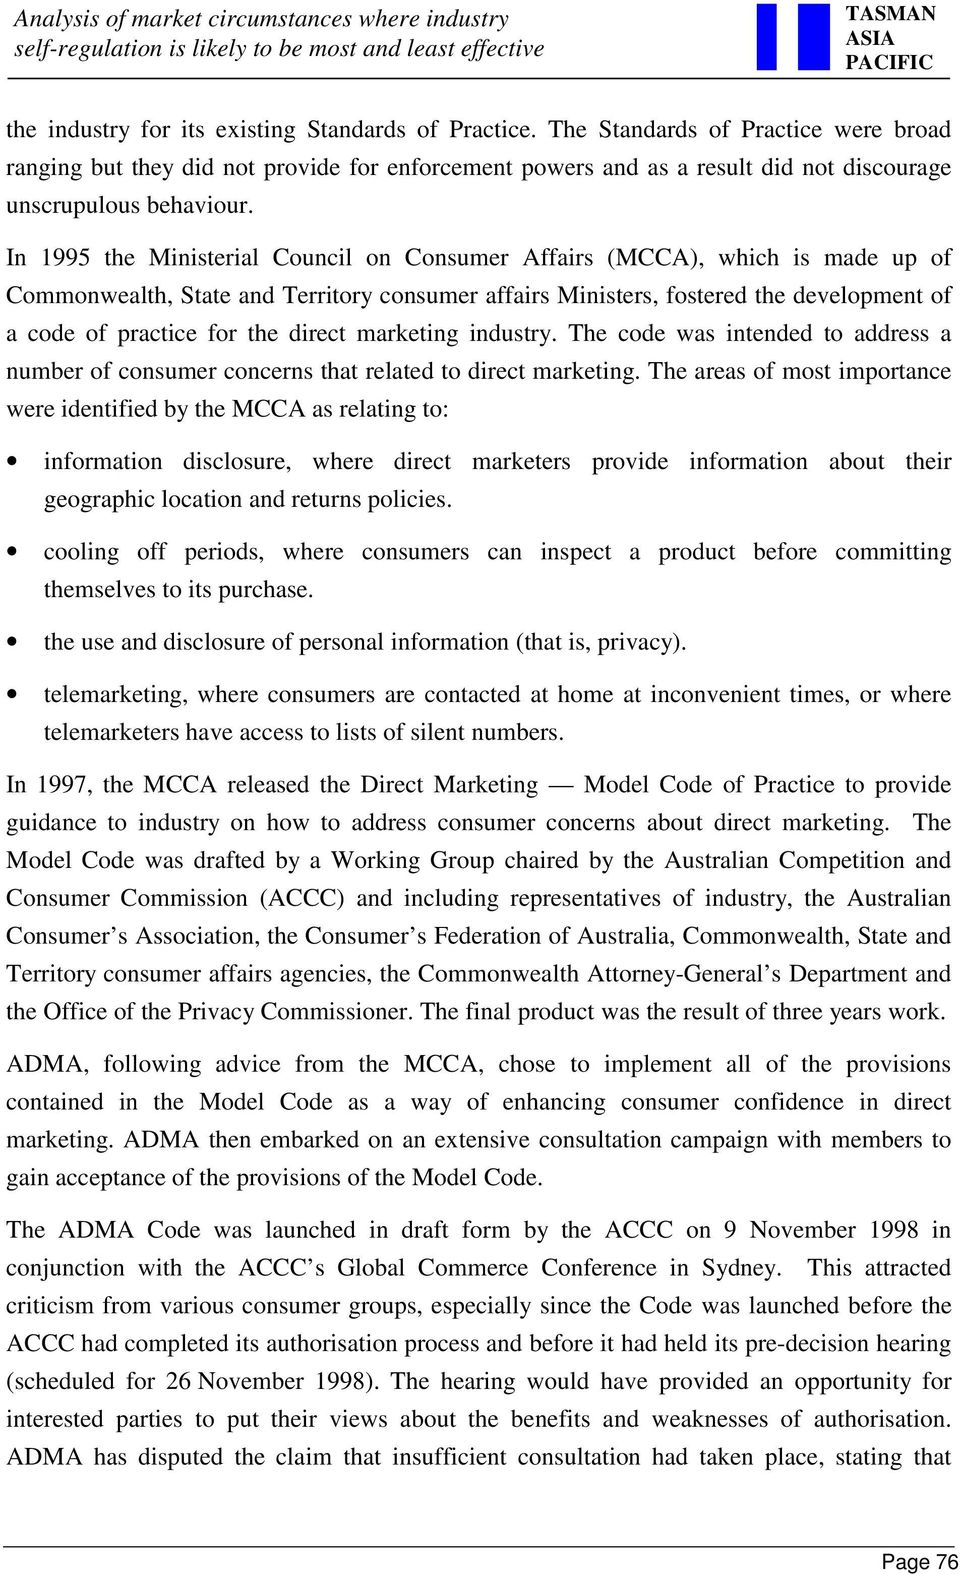 In 1995 the Ministerial Council on Consumer Affairs (MCCA), which is made up of Commonwealth, State and Territory consumer affairs Ministers, fostered the development of a code of practice for the